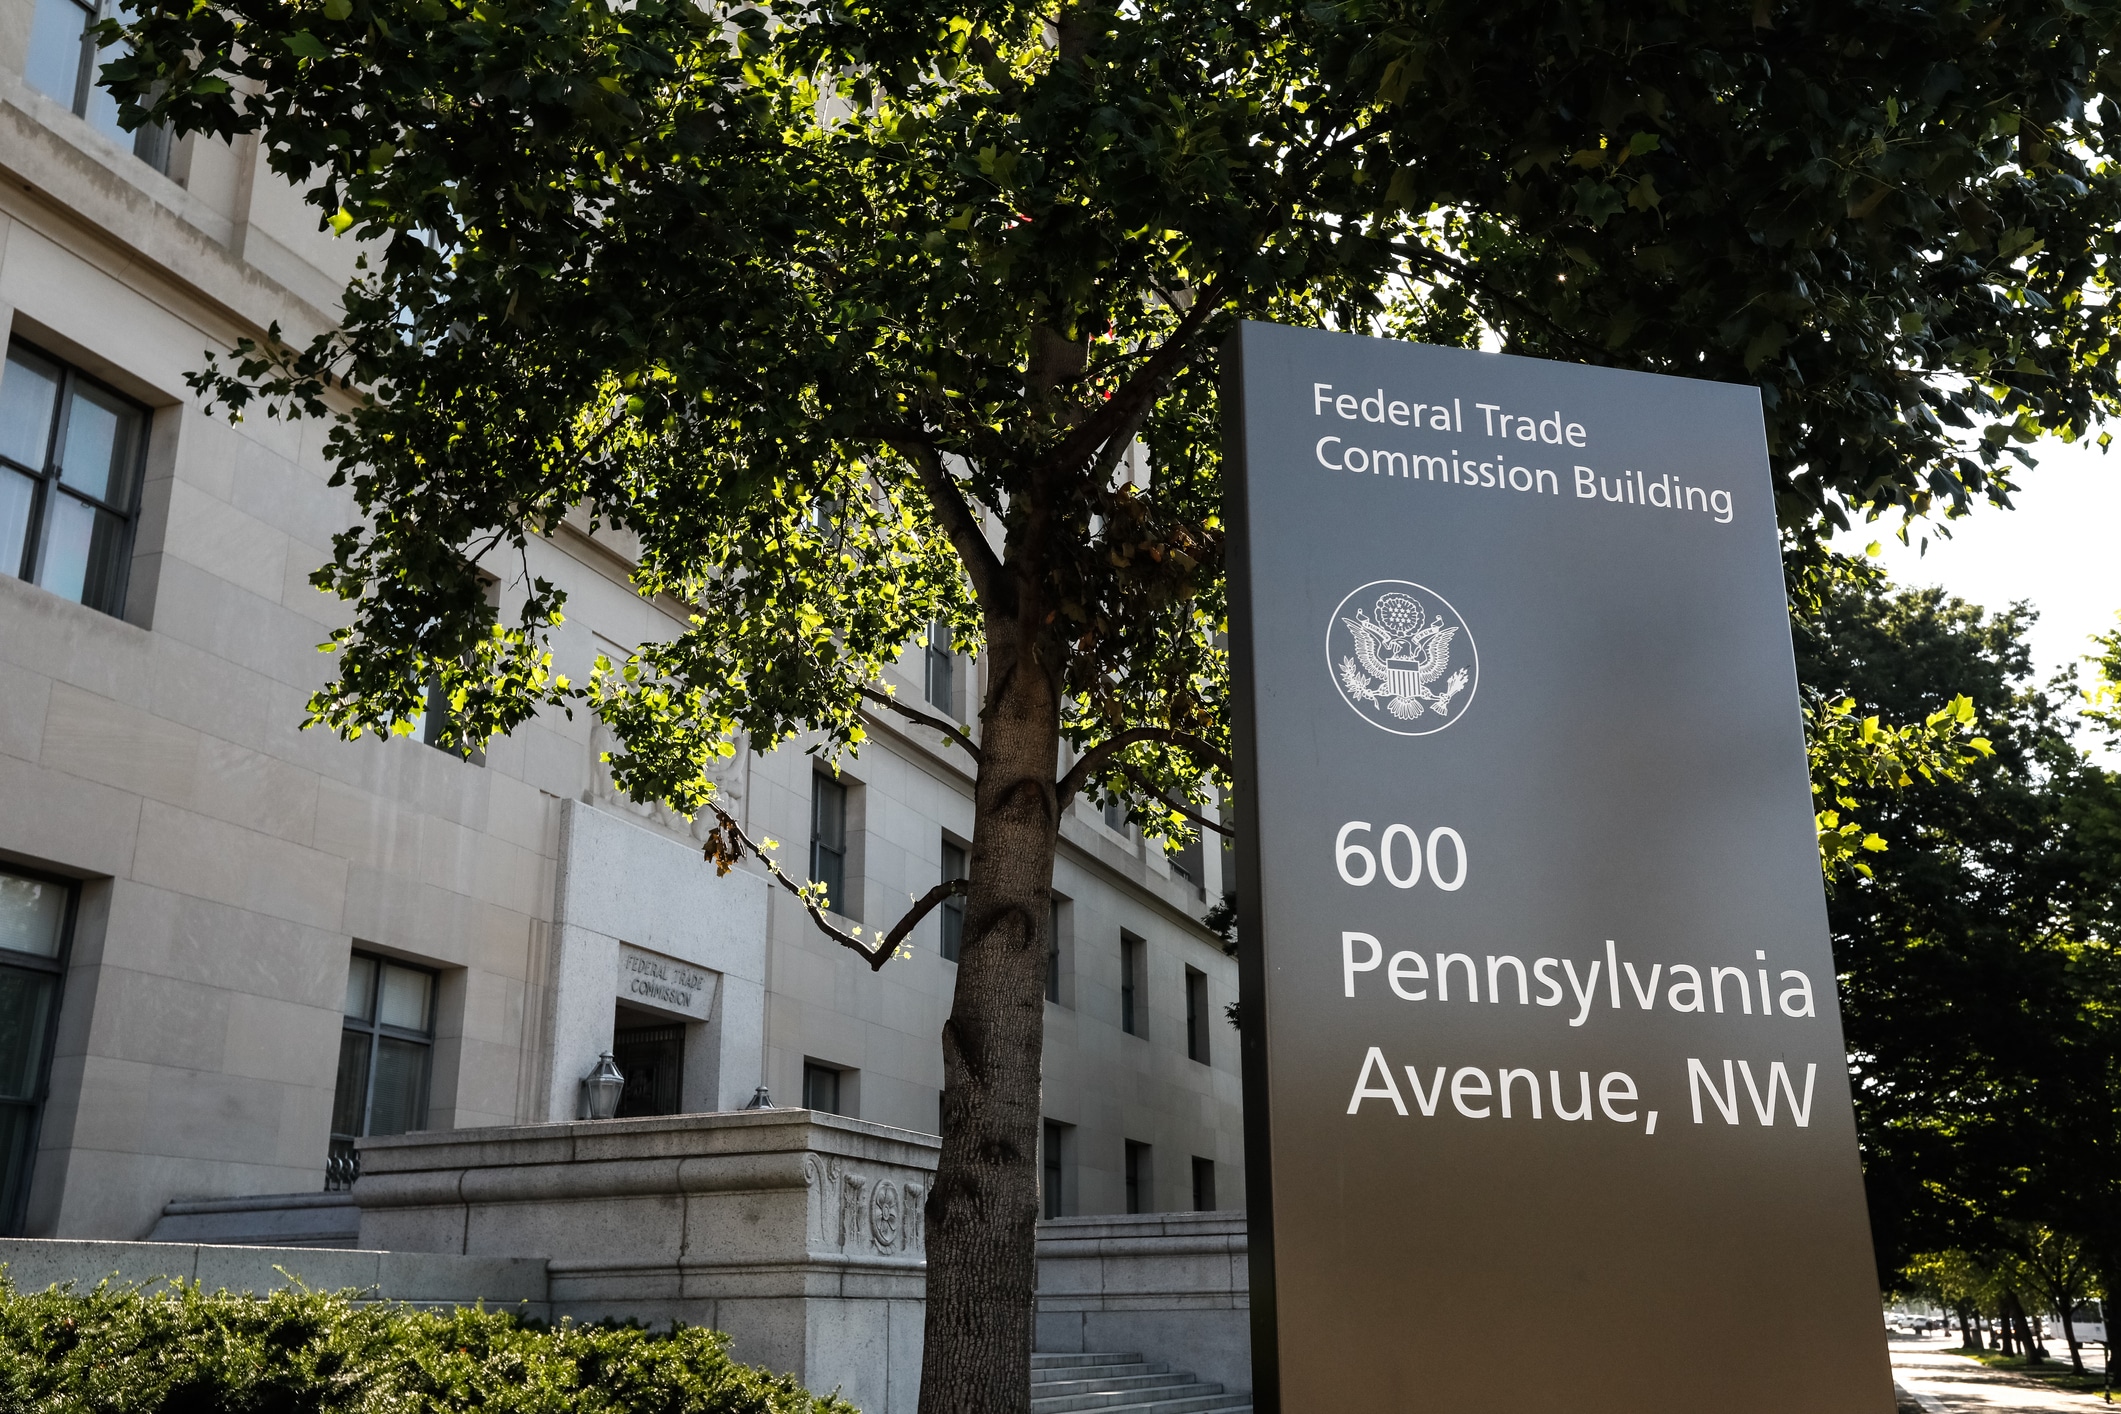 Washington, D.C., USA - July 19, 2019: This is the exterior view of the street sign in front of the US Federal Trade Commission headquarters. The FTC is the governmental agency tasked with regulating commerce and business practices for the federal government